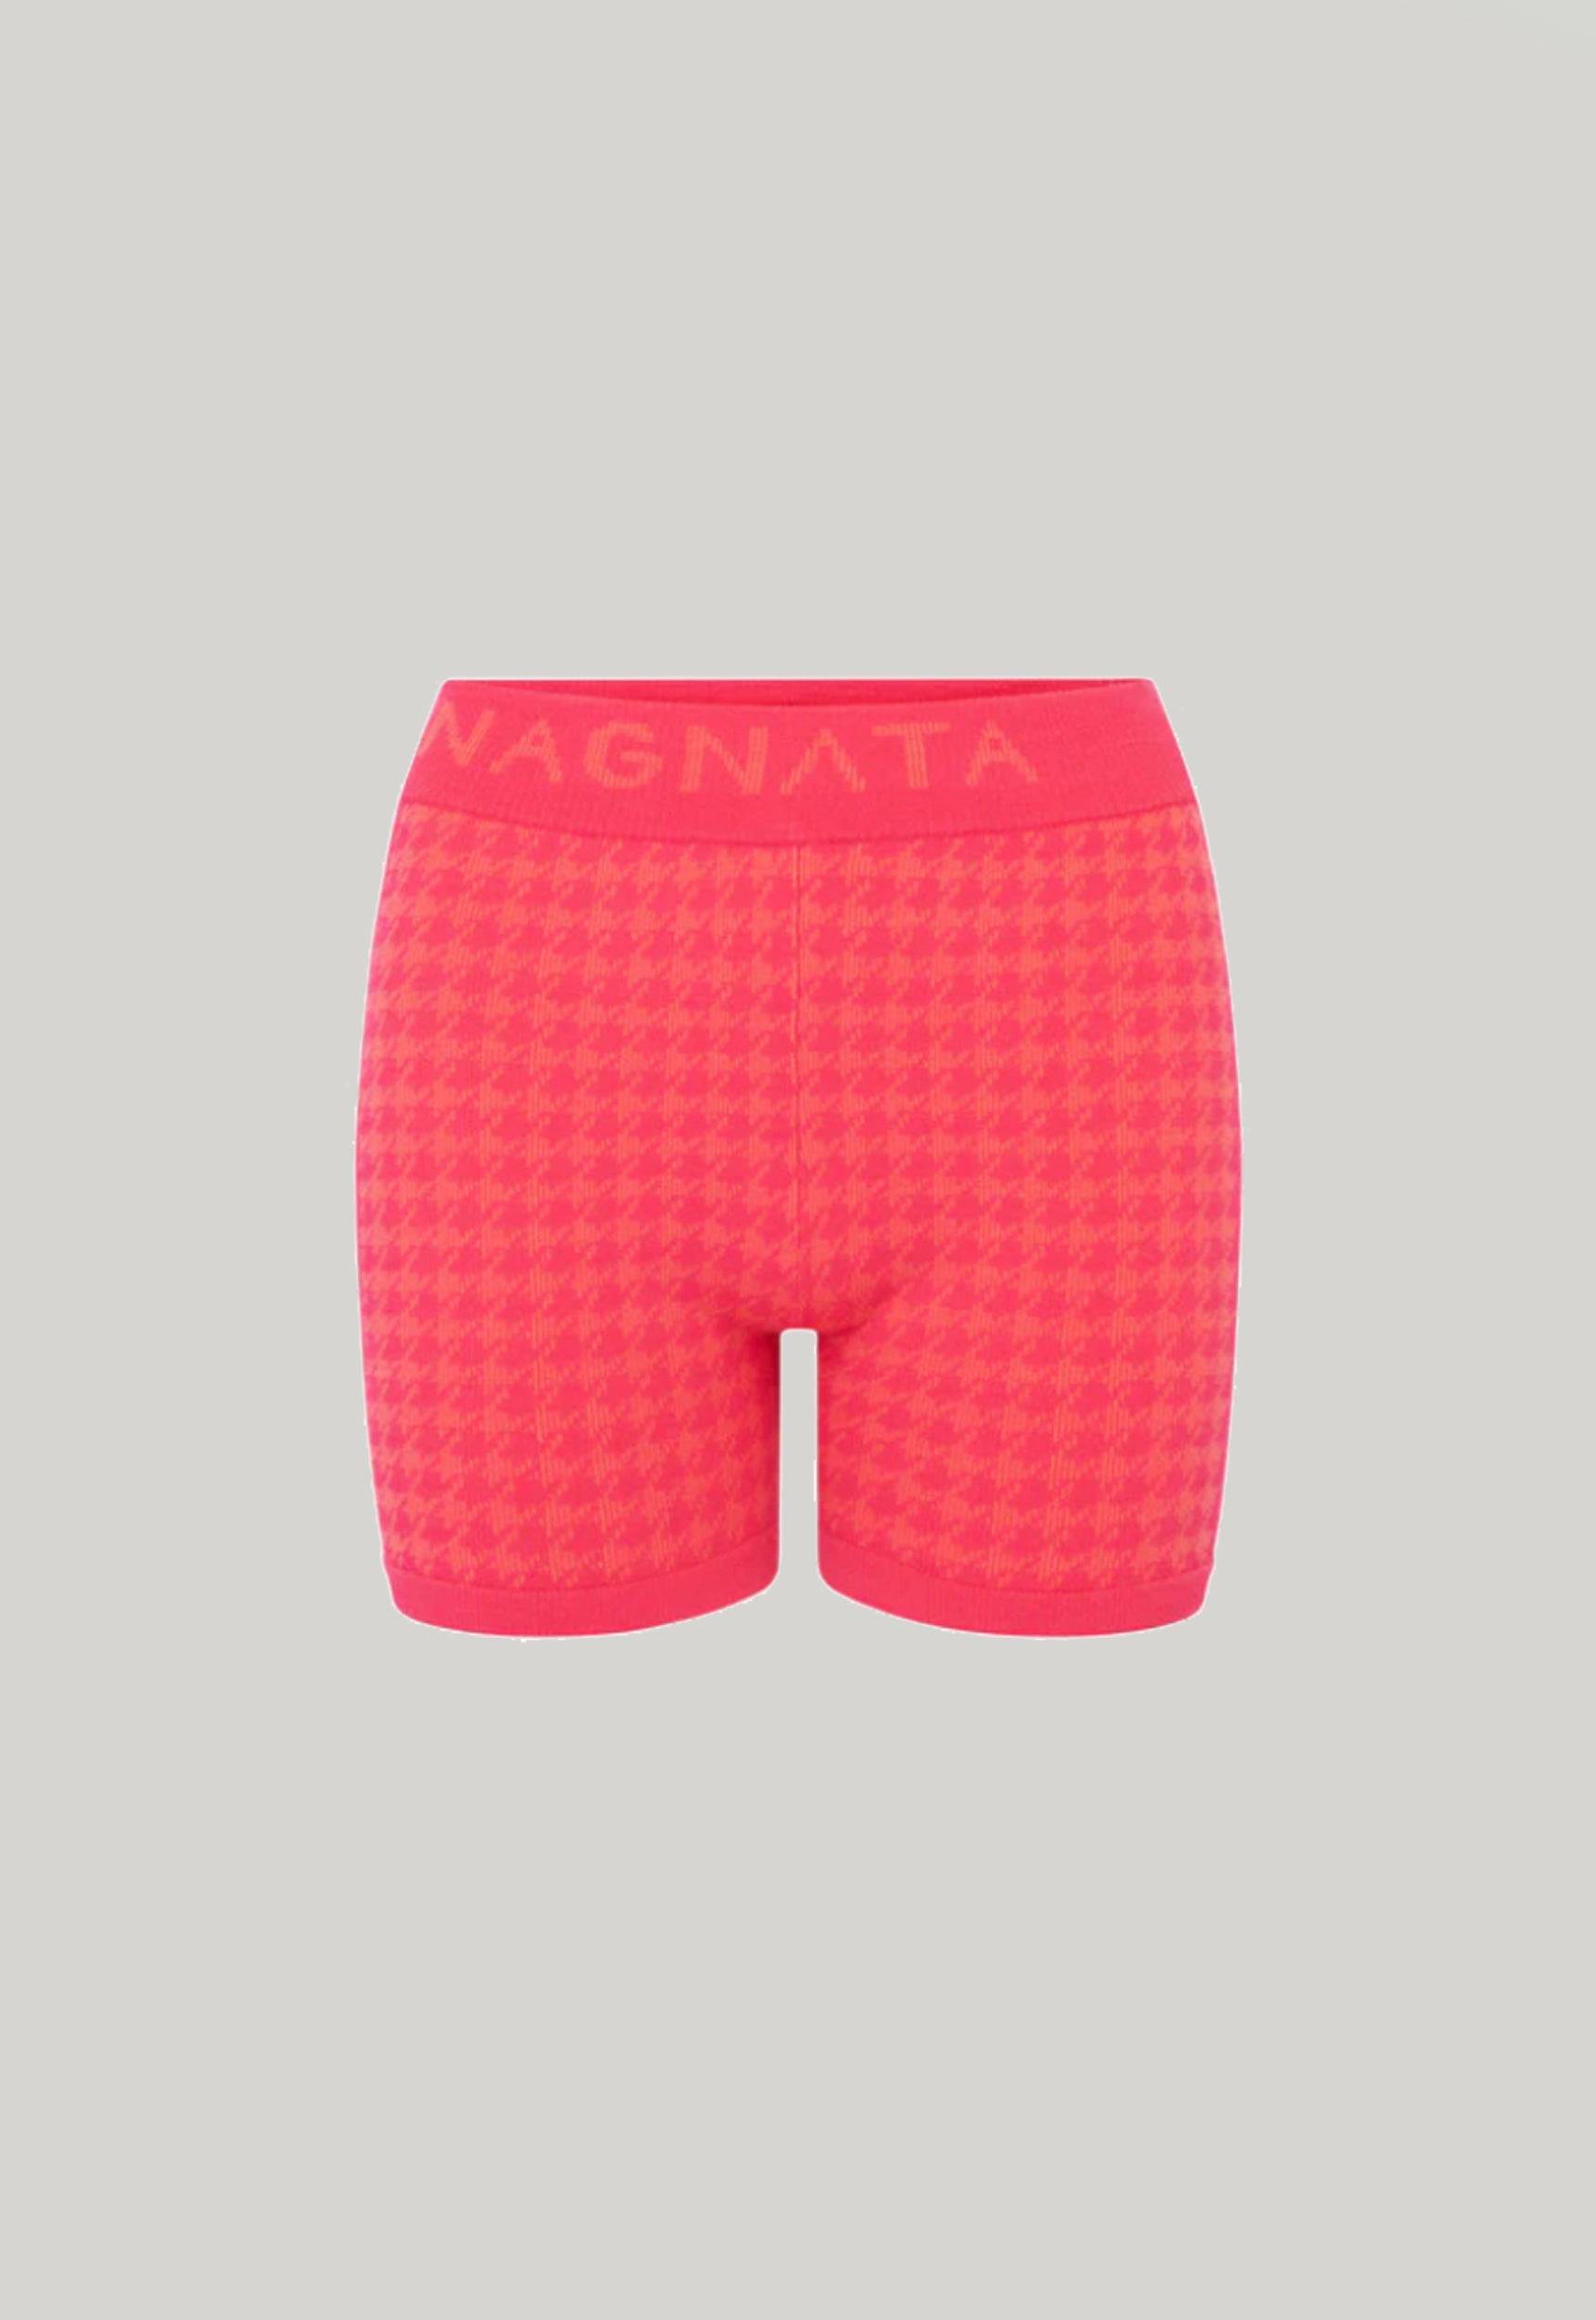 Jac+Jack NAGNATA CHECKED OUT KNIT SHORT in Hot Pink/Neon Pink